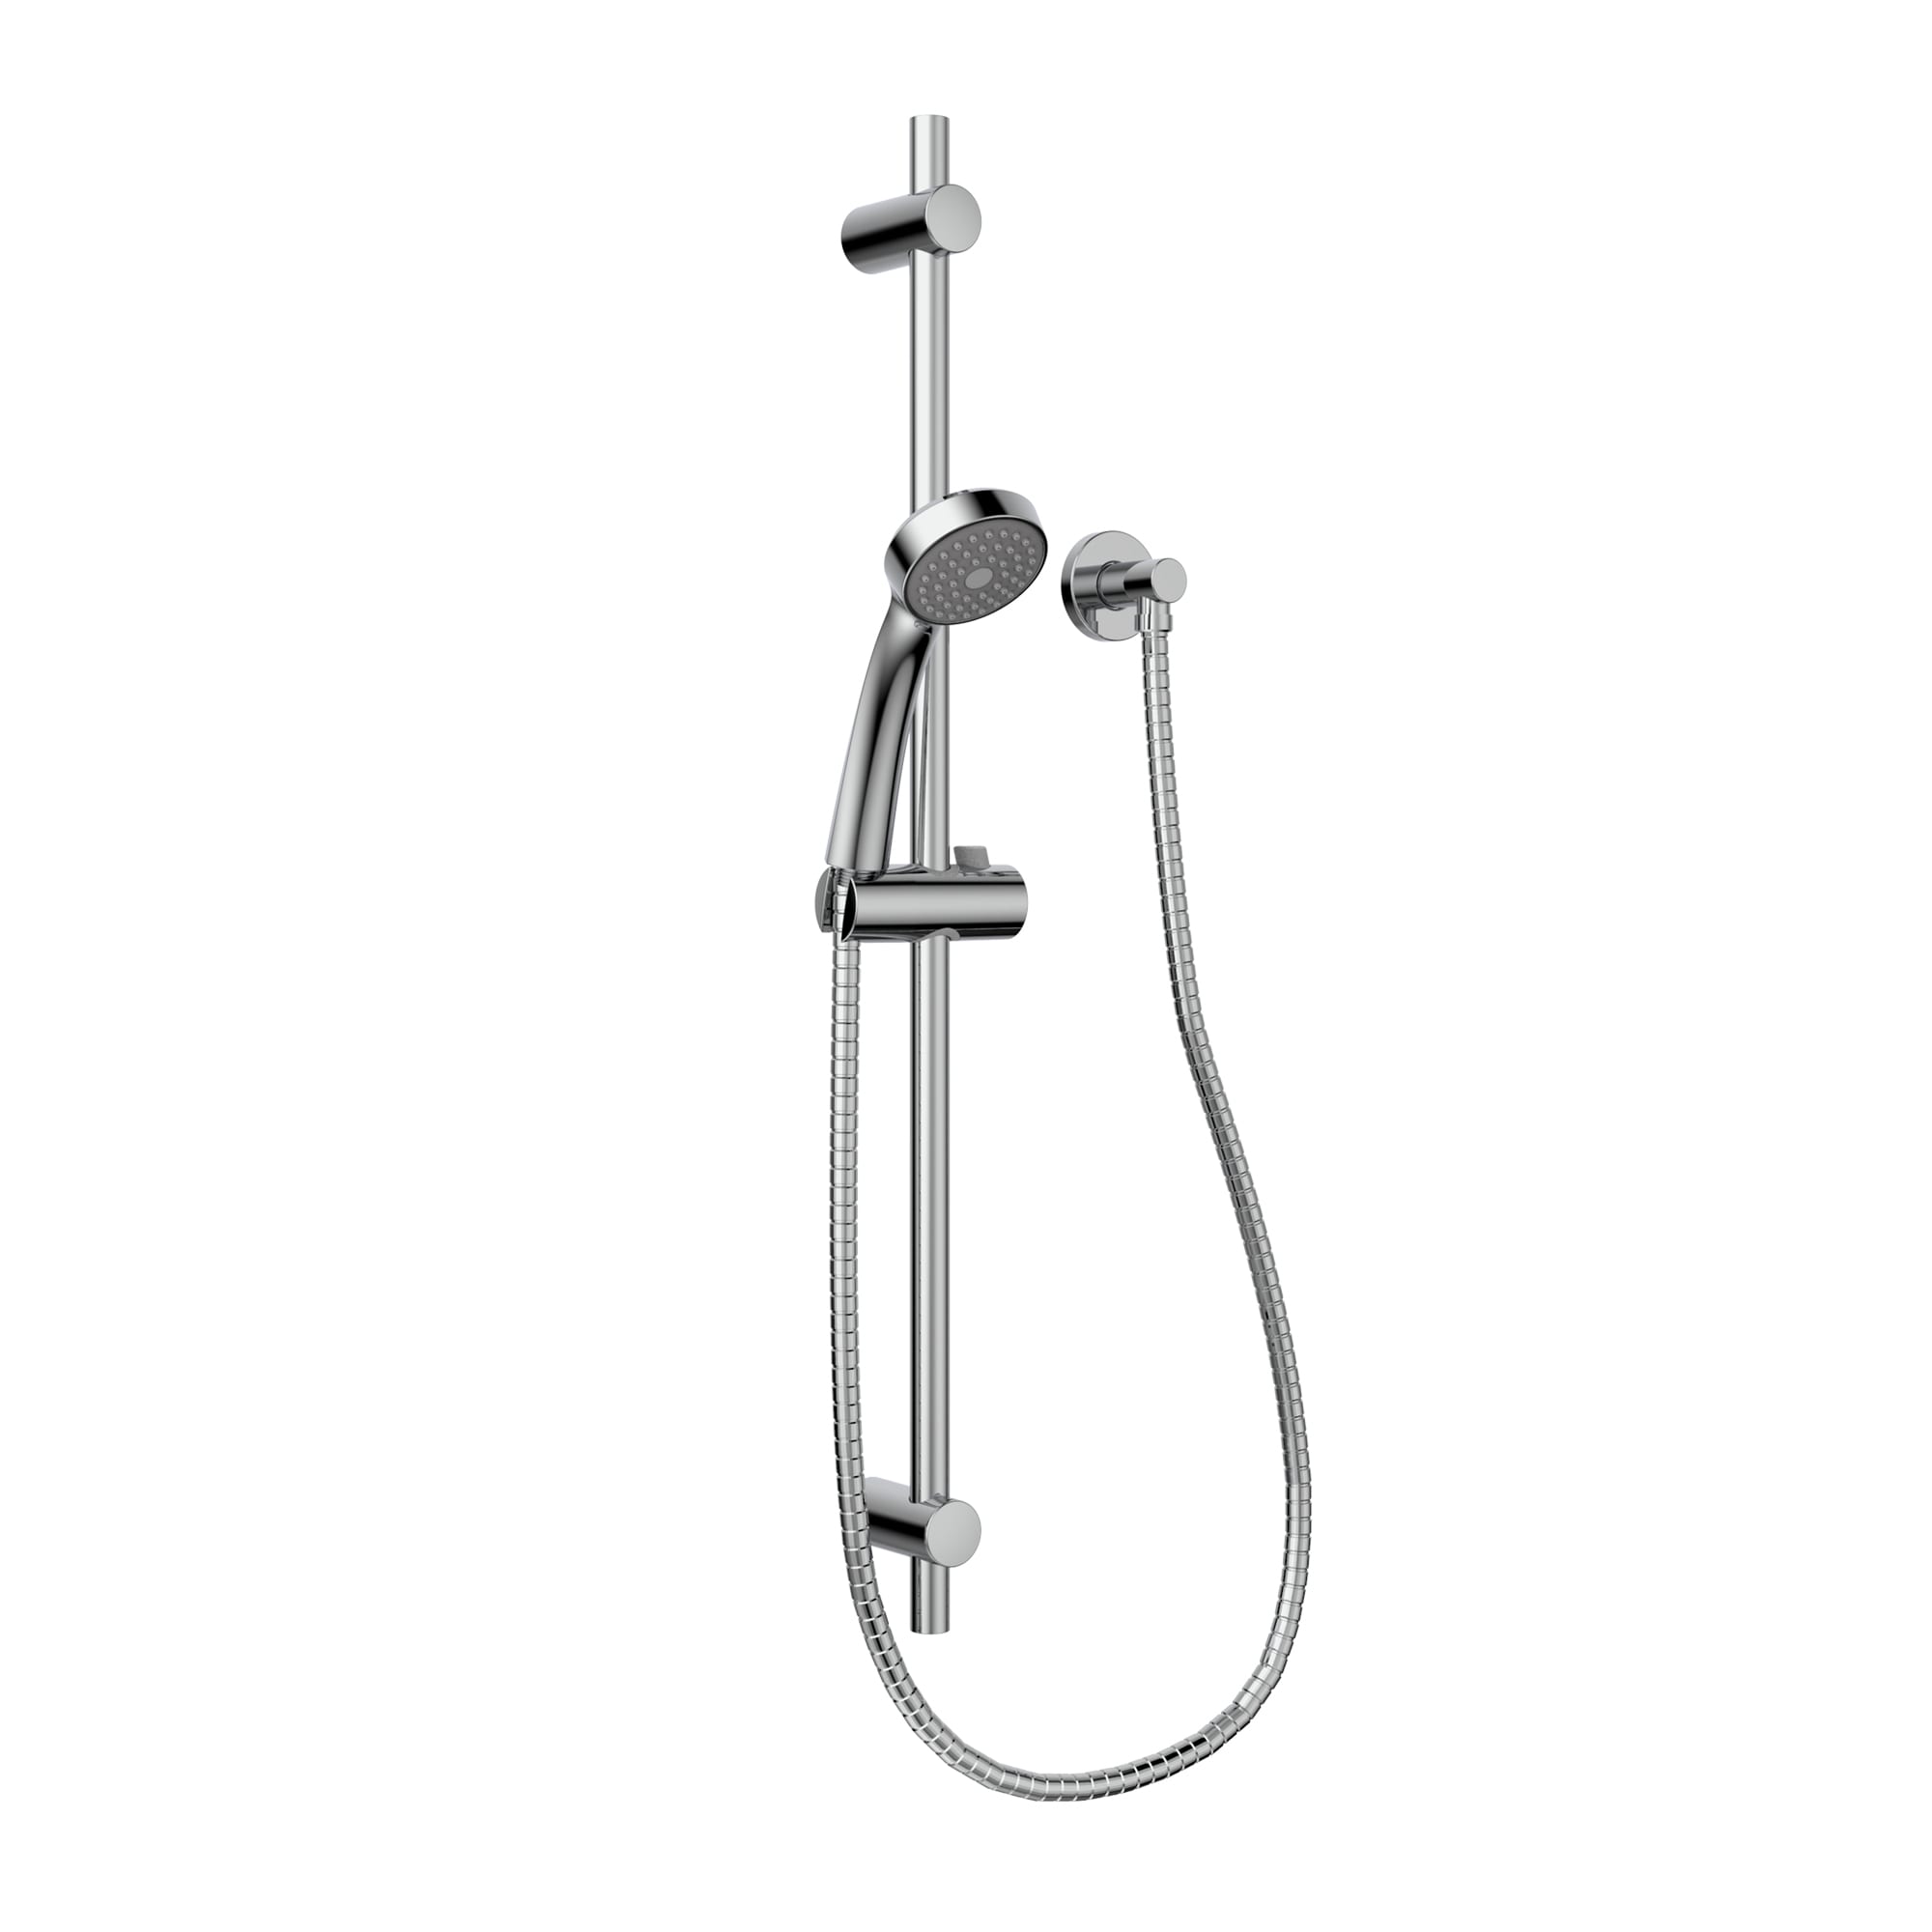 Bélanger B90-534- Sliding Bar Kit (Round) With Hand Shower, Water Supply Elbow And Flexible Hose